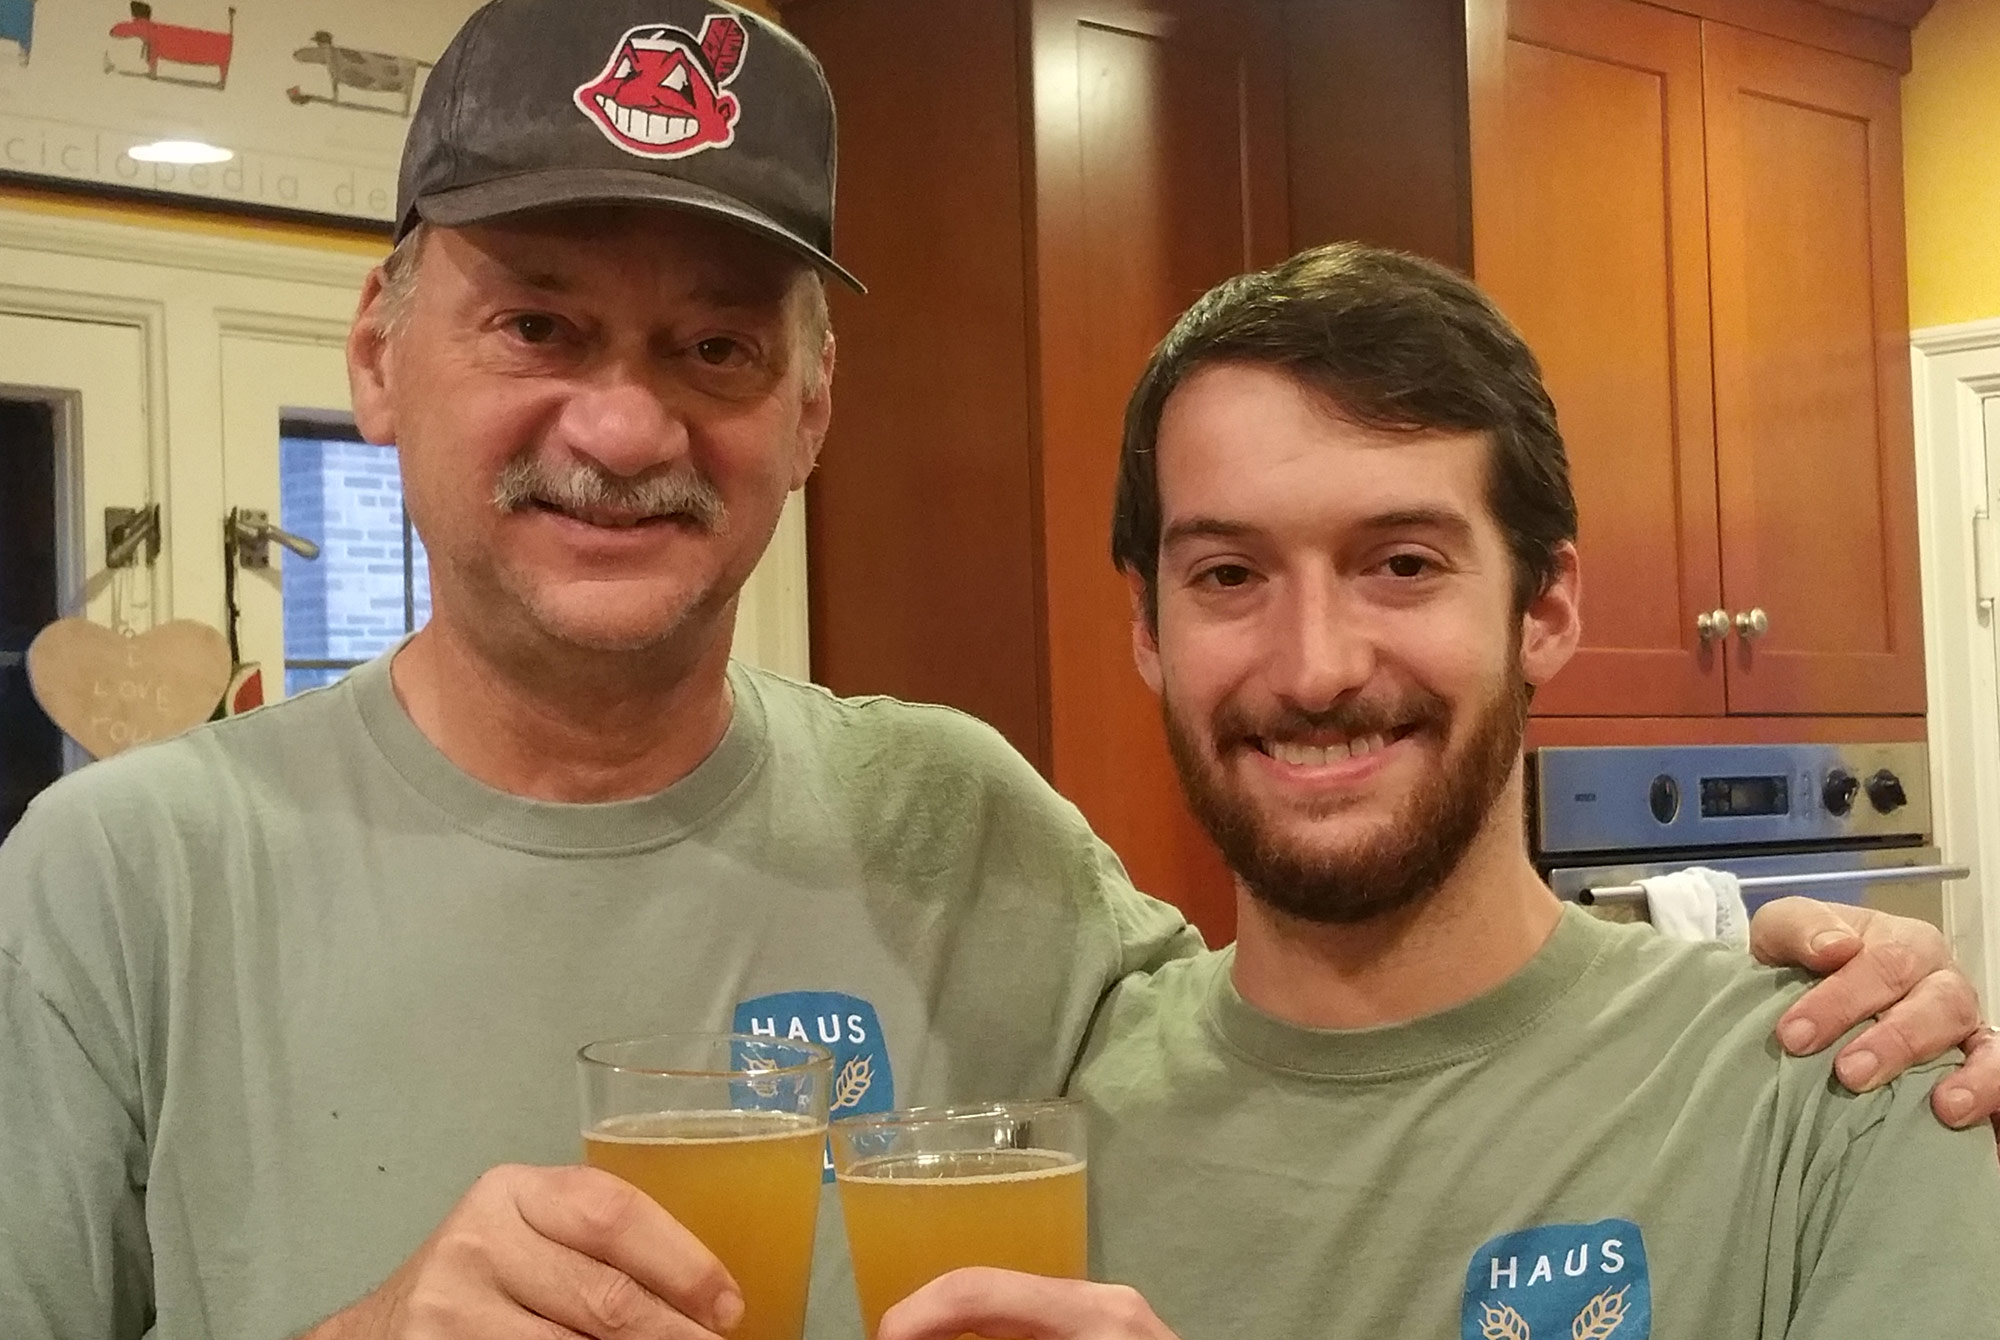 A Pint with Andrew Martahus, Co-Founder of Haus Malt